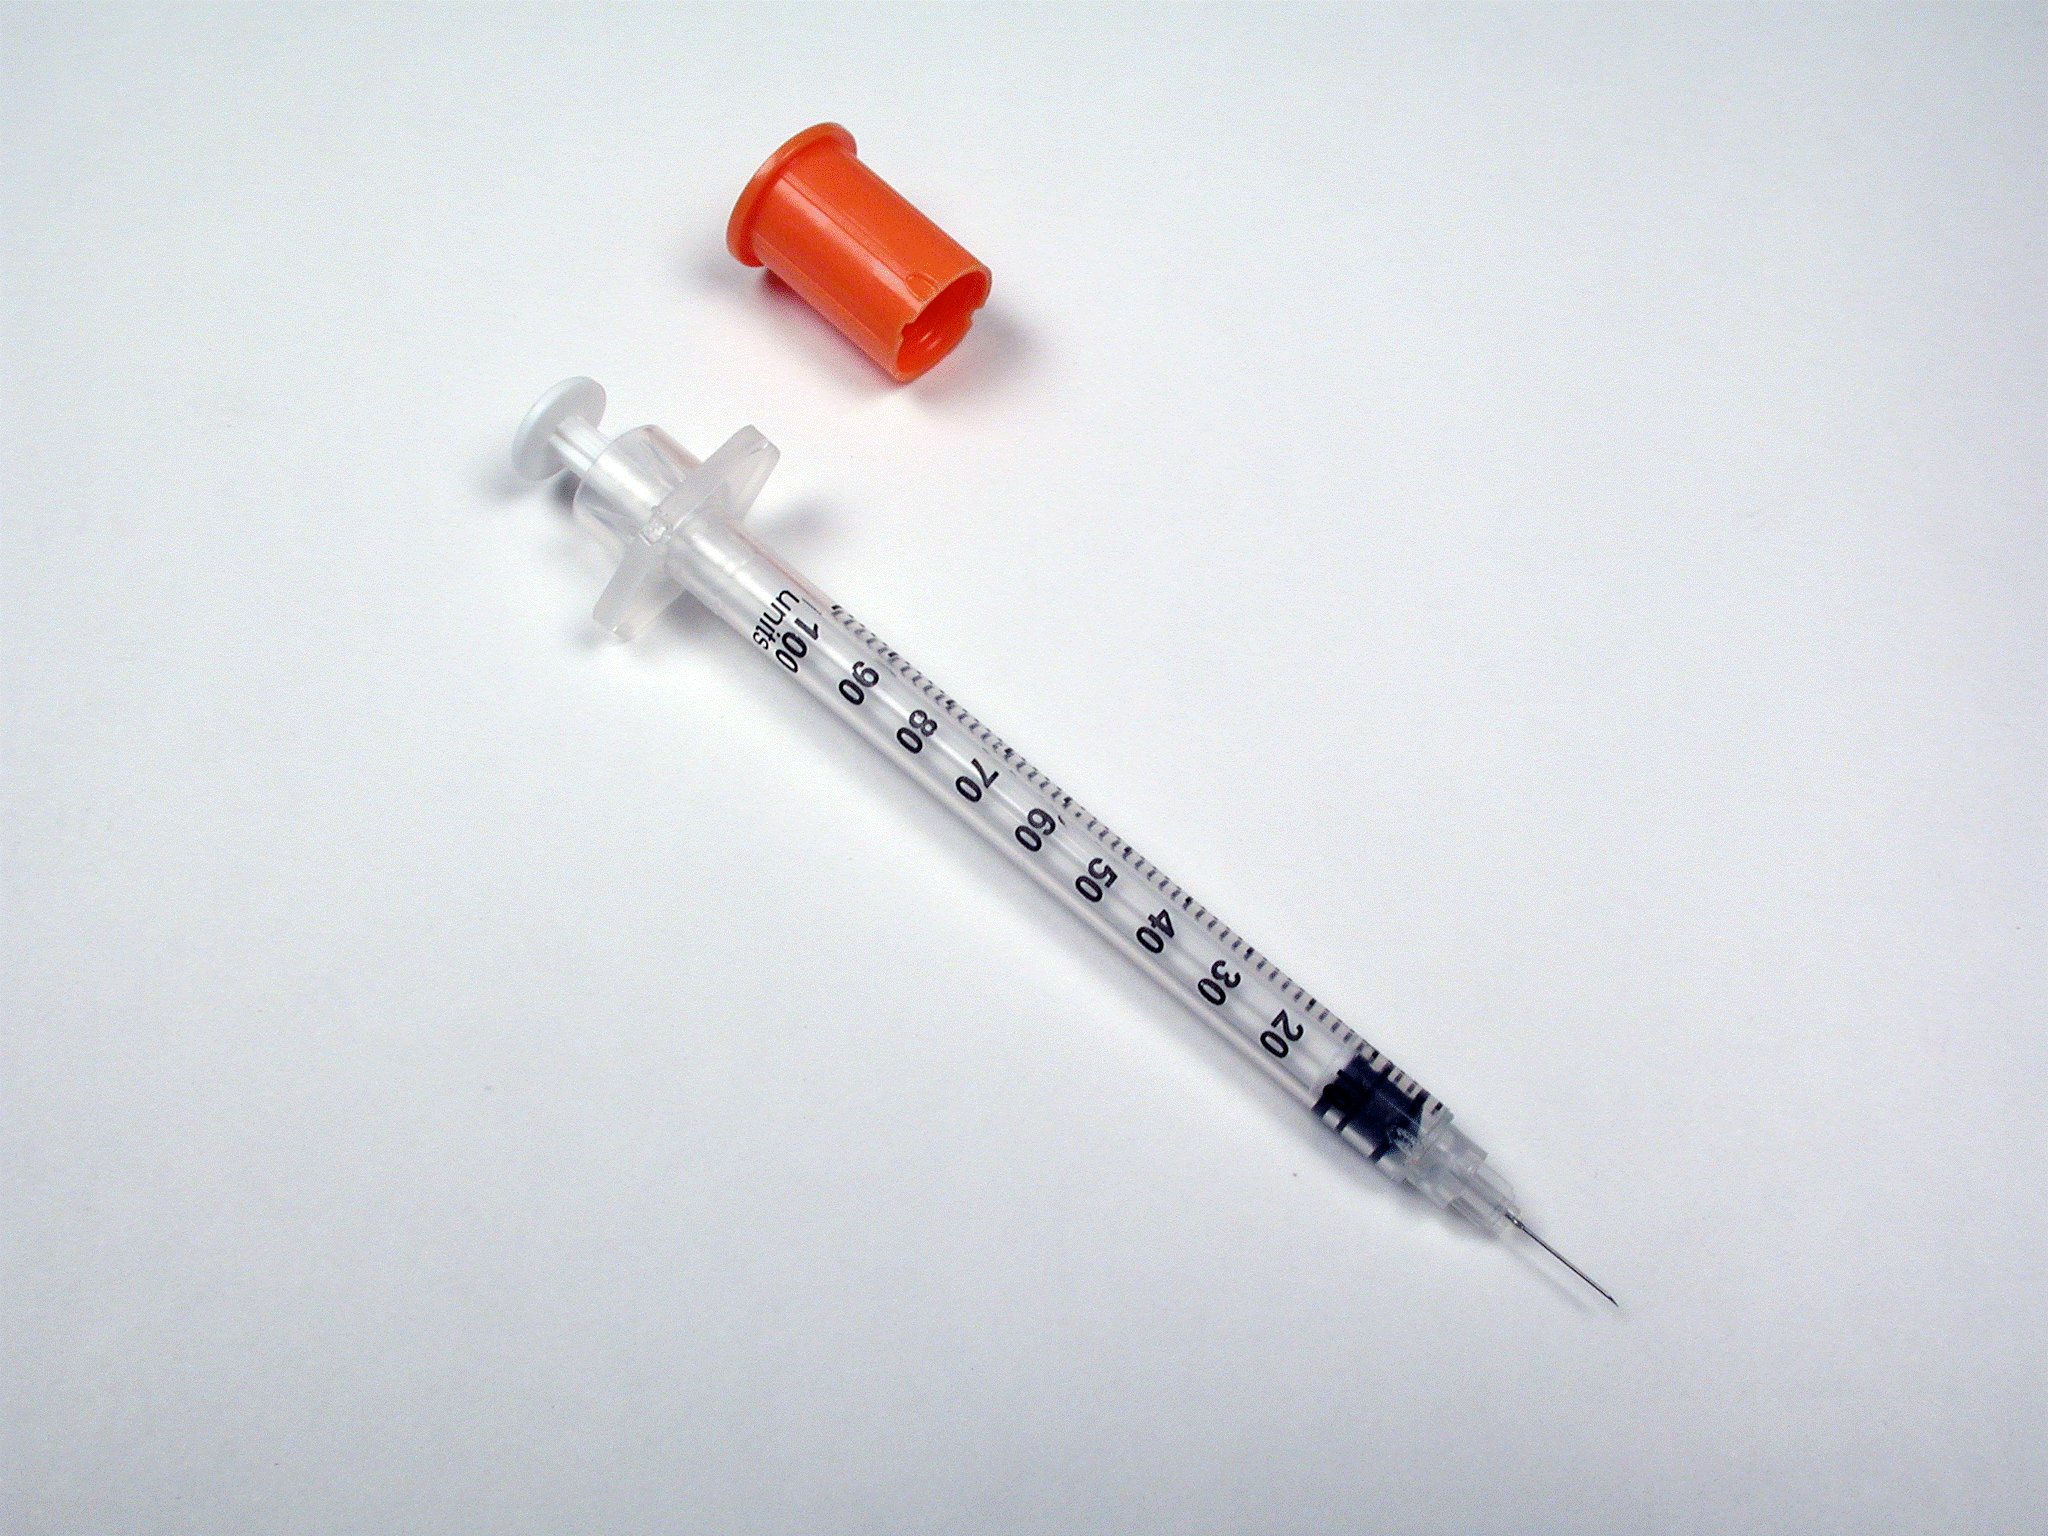 Benefits Of Insulin Syringes